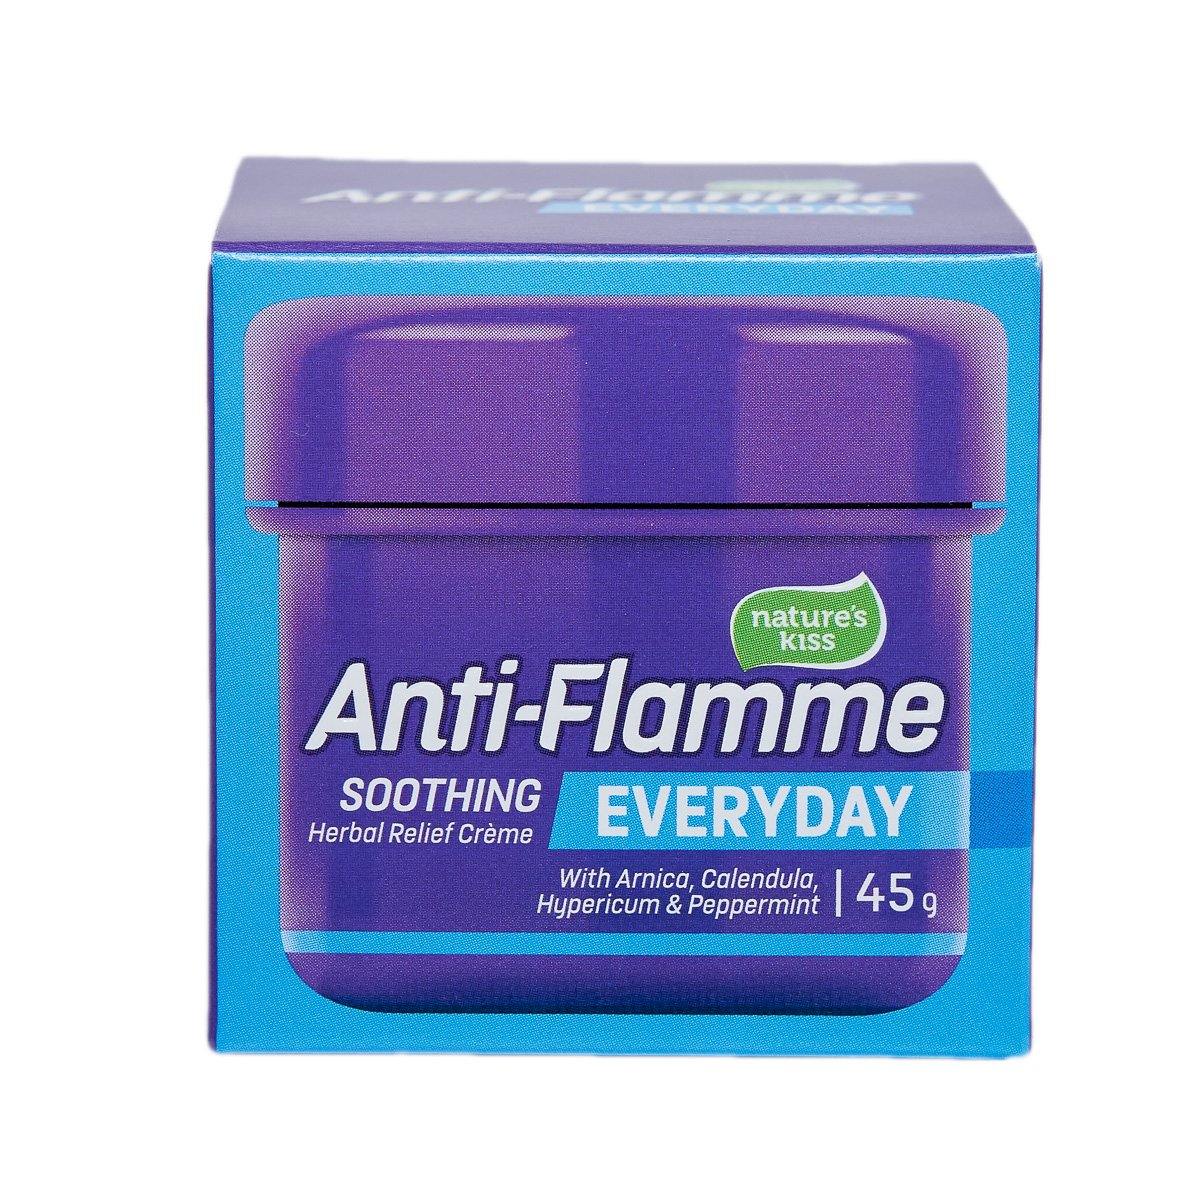 Anti Flamme Everyday Herbal Relief Creme 45gm - DominionRoadPharmacy